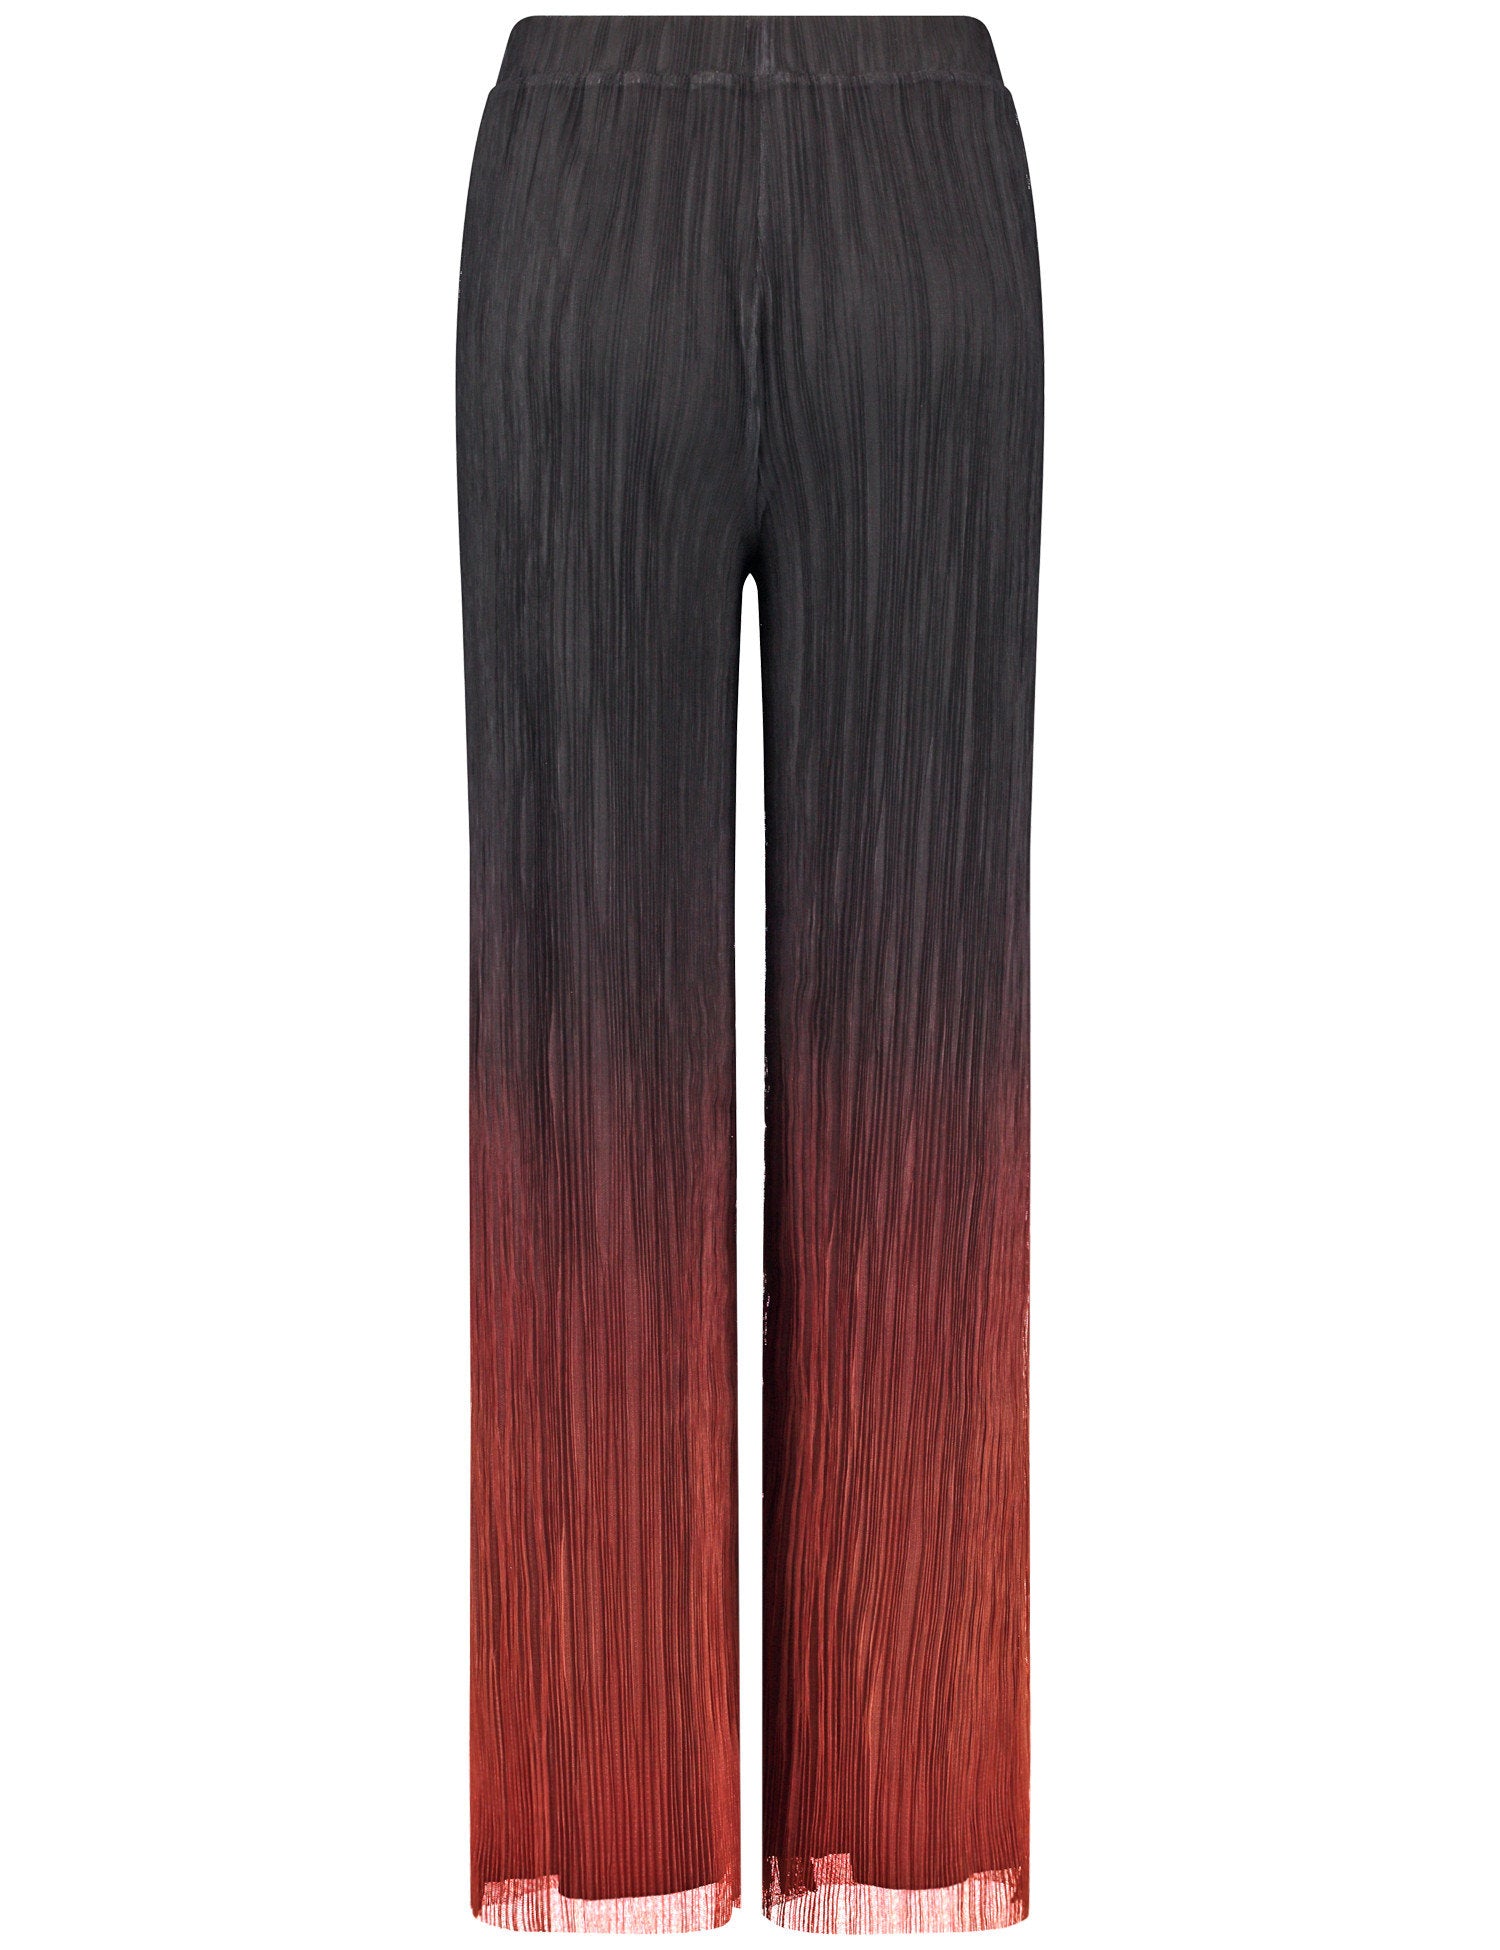 Pleated Trousers With Colour Graduation_521302-16237_1102_08